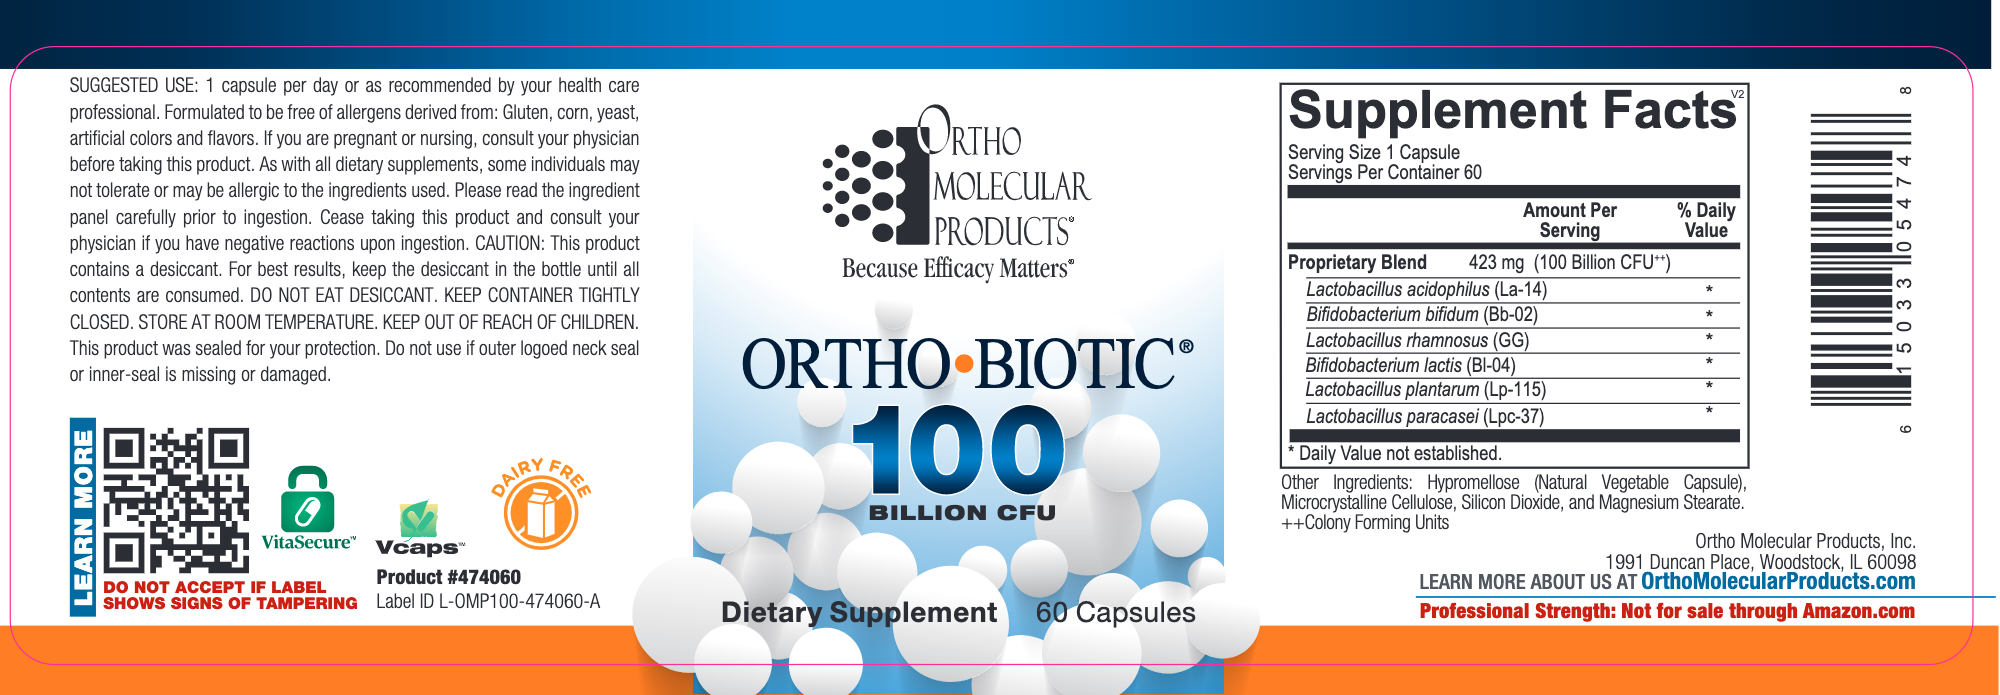 Ortho Biotic 100-Vitamins & Supplements-Ortho Molecular Products-30 Capsules-Pine Street Clinic